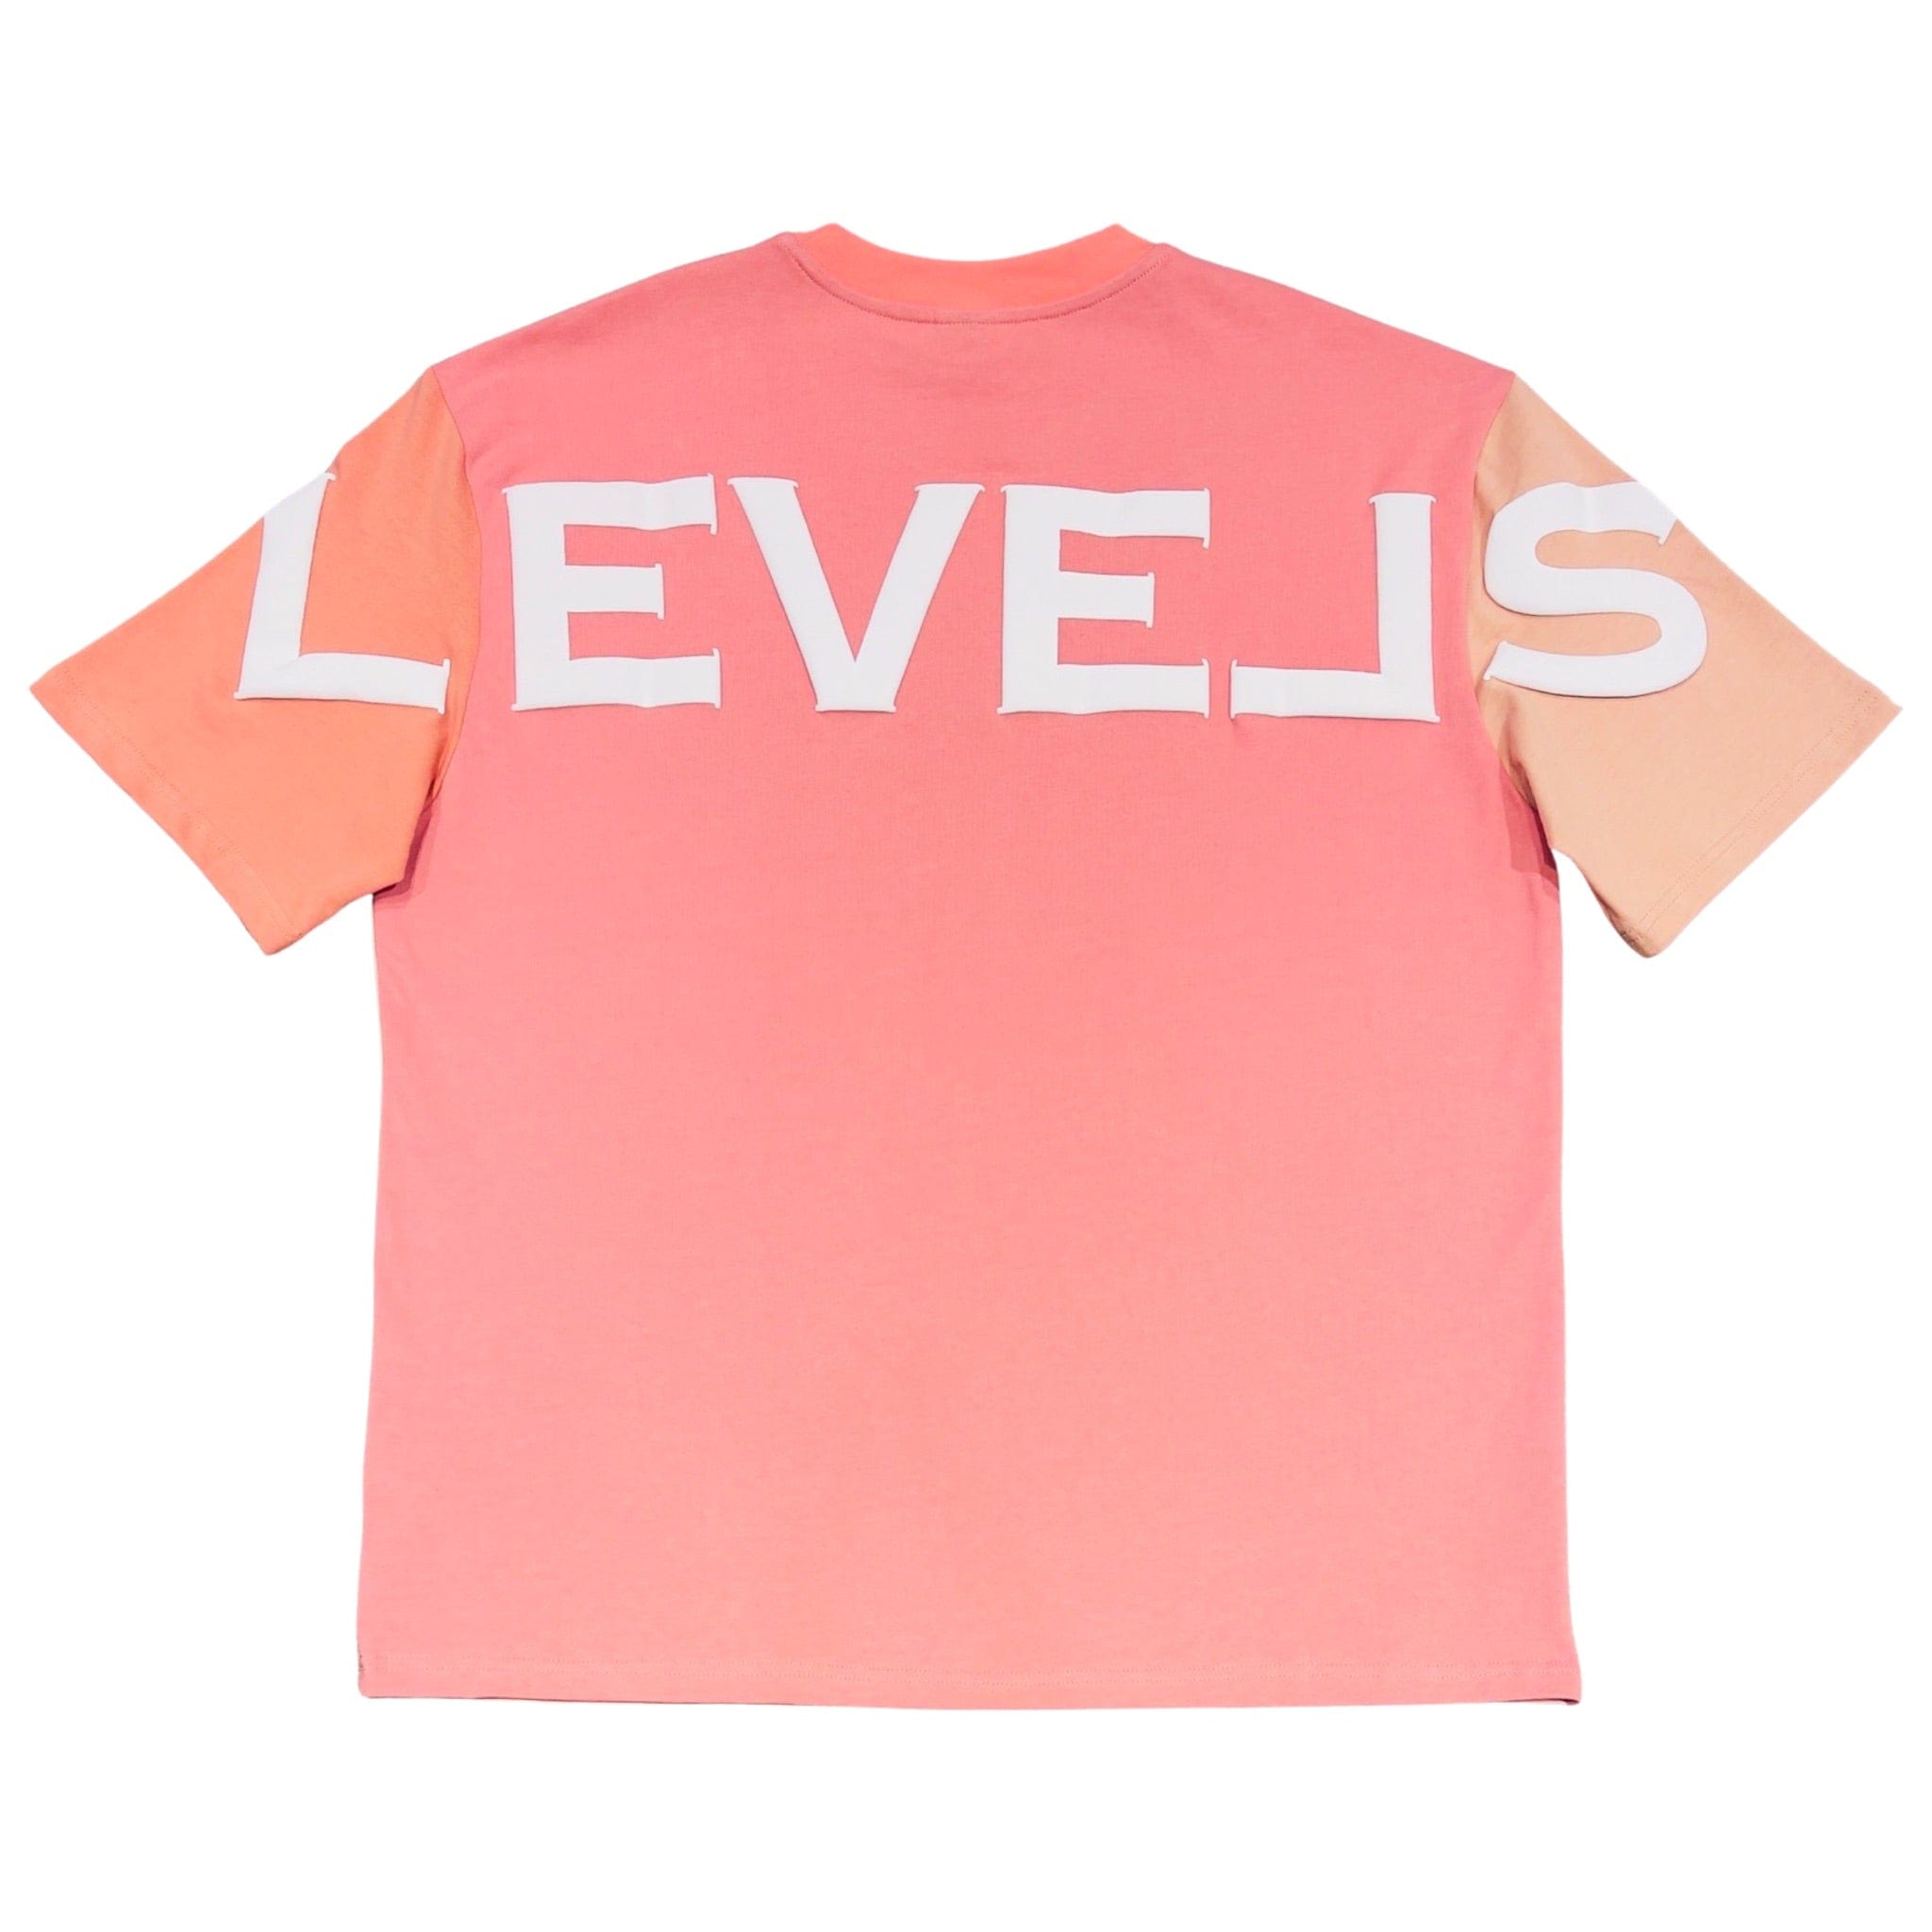 LEVELS, LLC Apparel & Accessories LEVELS SIGNATURE OVERSIZED TEE | CEMONA EDITION